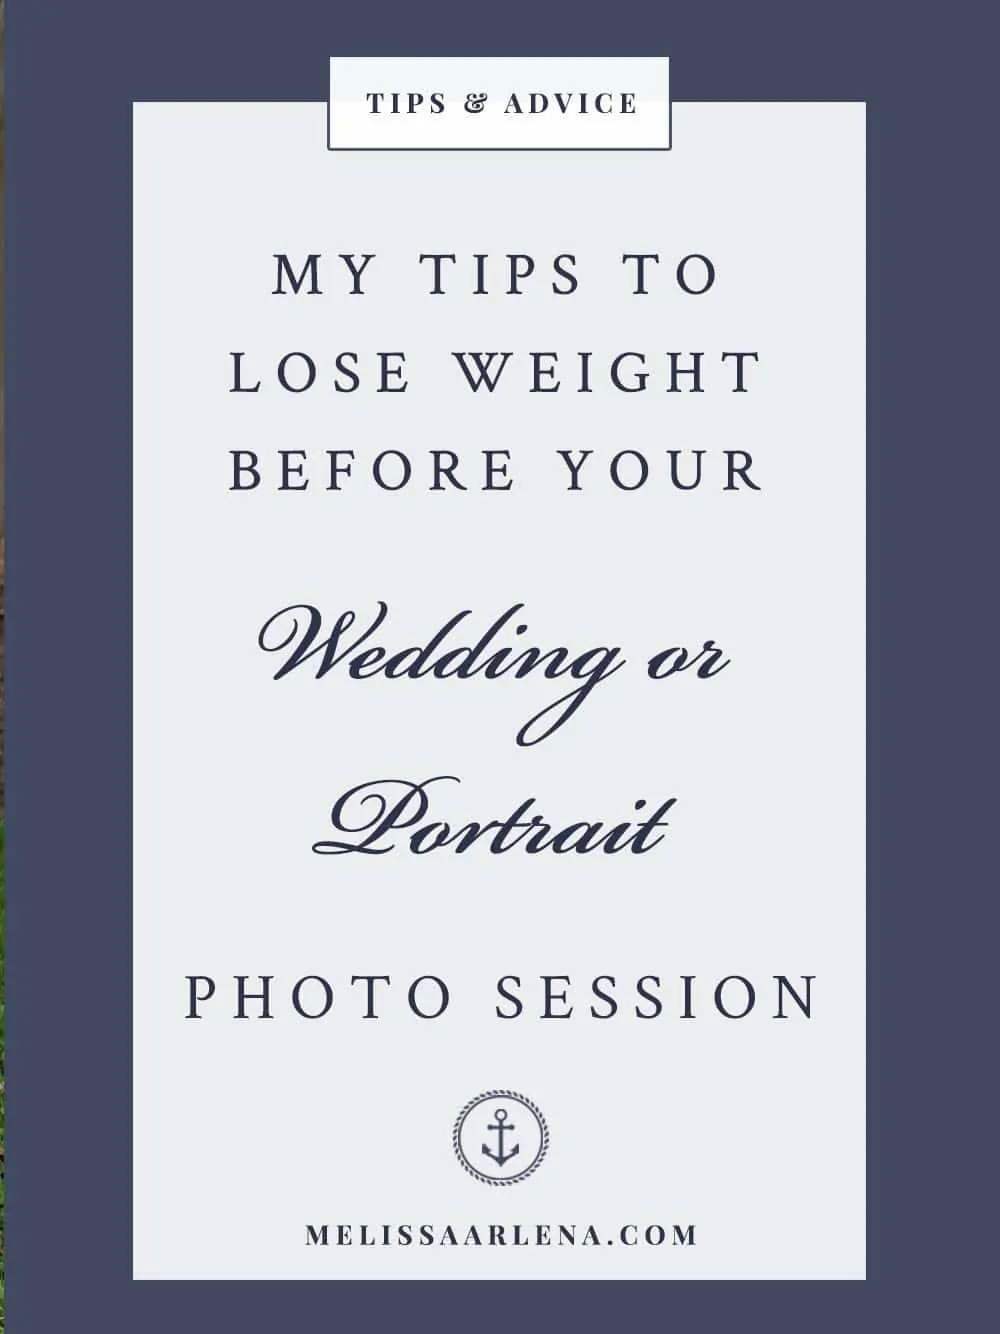 My Life : Tips to Lose Weight Before Your Wedding Or Portrait Session by Melissa Arlena Photography